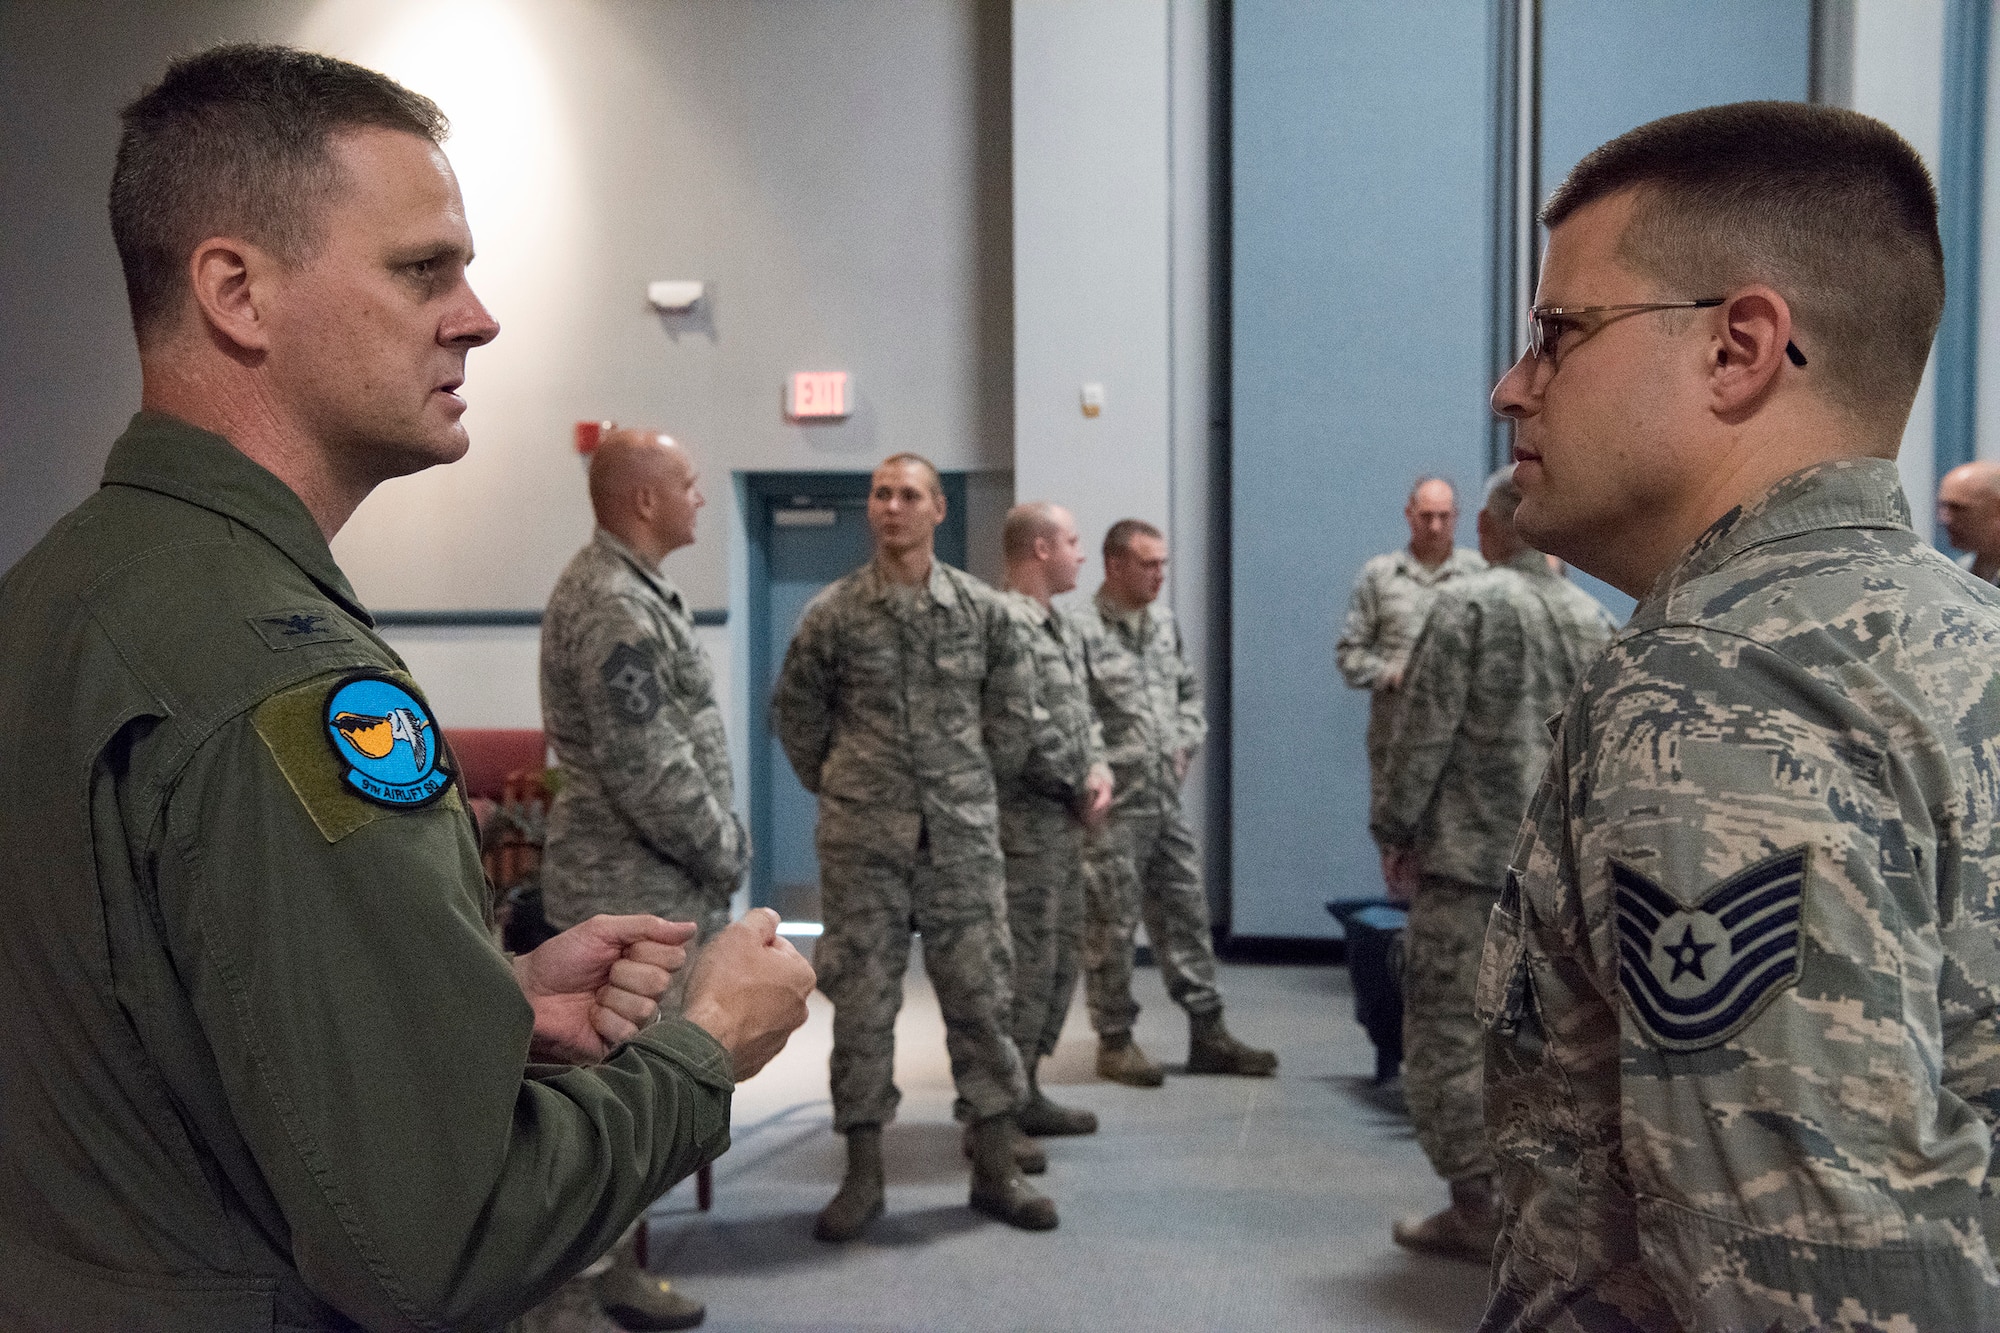 Col. Joel Safranek (left), 436th Airlift Wing commander, speaks with Tech. Sgt. Emmanuel Jacoby, 436th Maintenance Squadron, Operating Location Alpha, regional isochronal inspection floor chief, after a commander’s call Aug. 23, 2018, at Westover Air Reserve Base, Mass. Safranek was one of six leaders from Dover Air Force Base, Del., who visited Airmen assigned to the geographically separated maintenance unit. (U.S. Air Force photo by Staff Sgt. Zoe Russell)